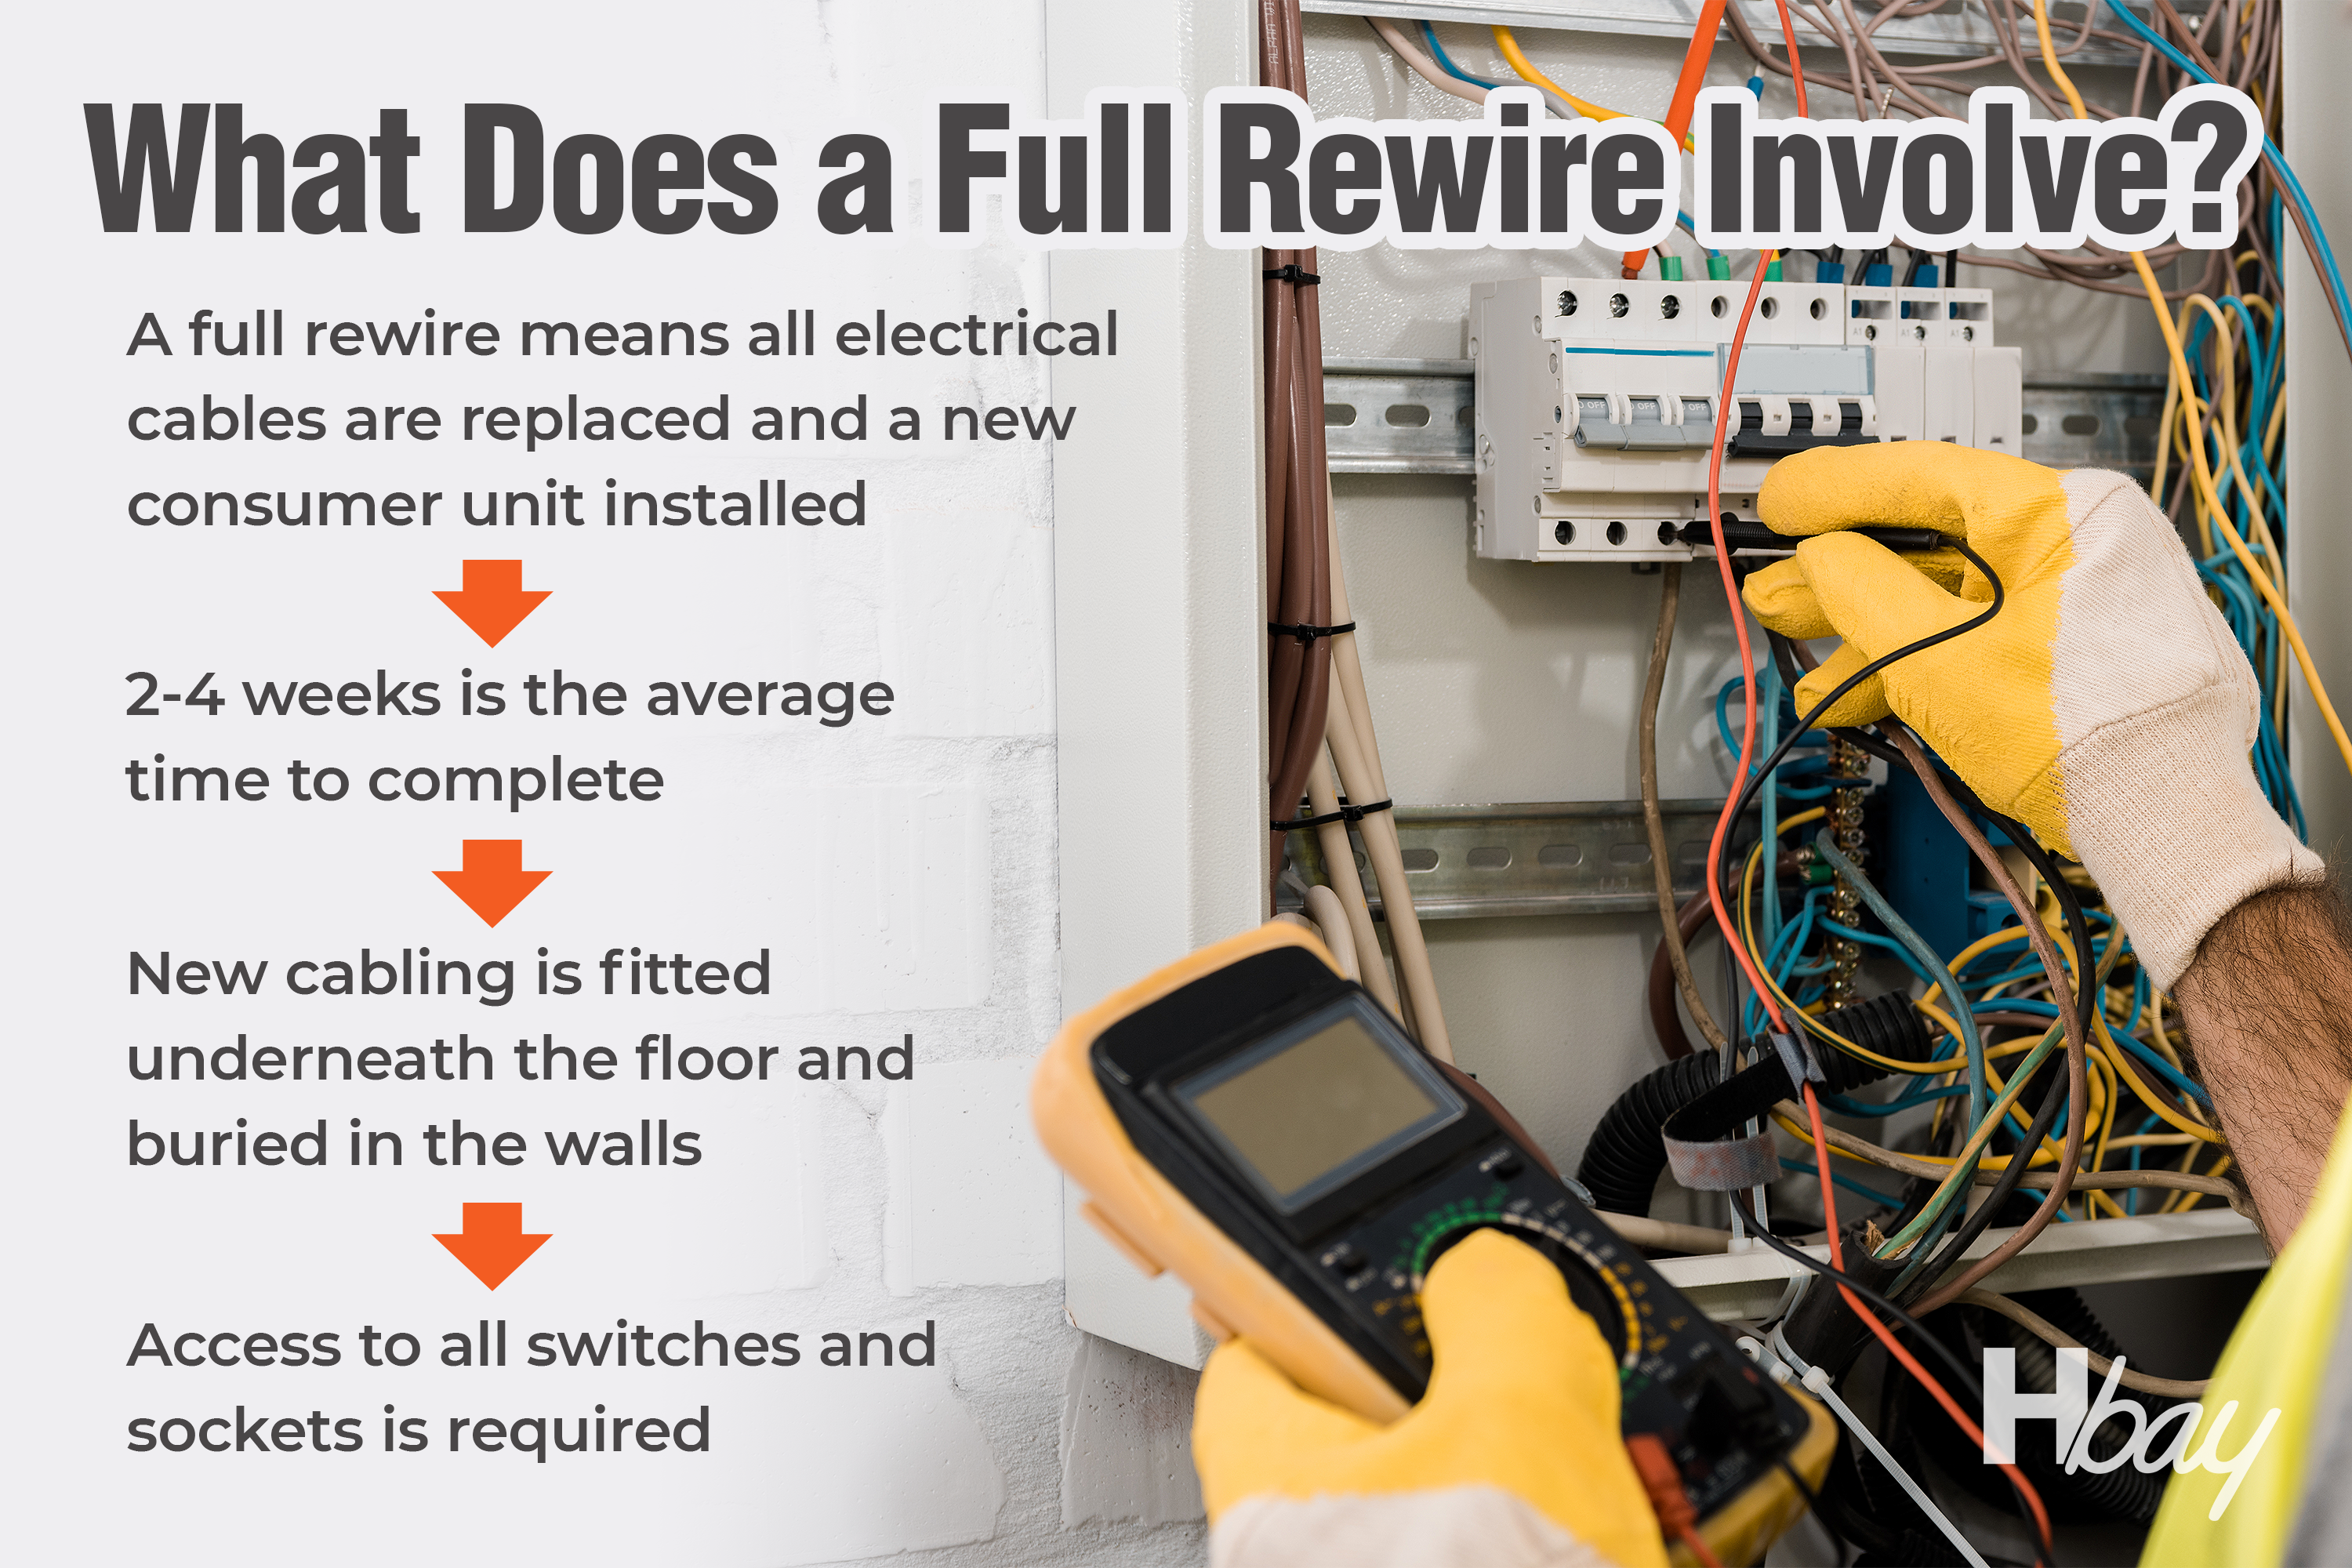 What does a full rewire involve